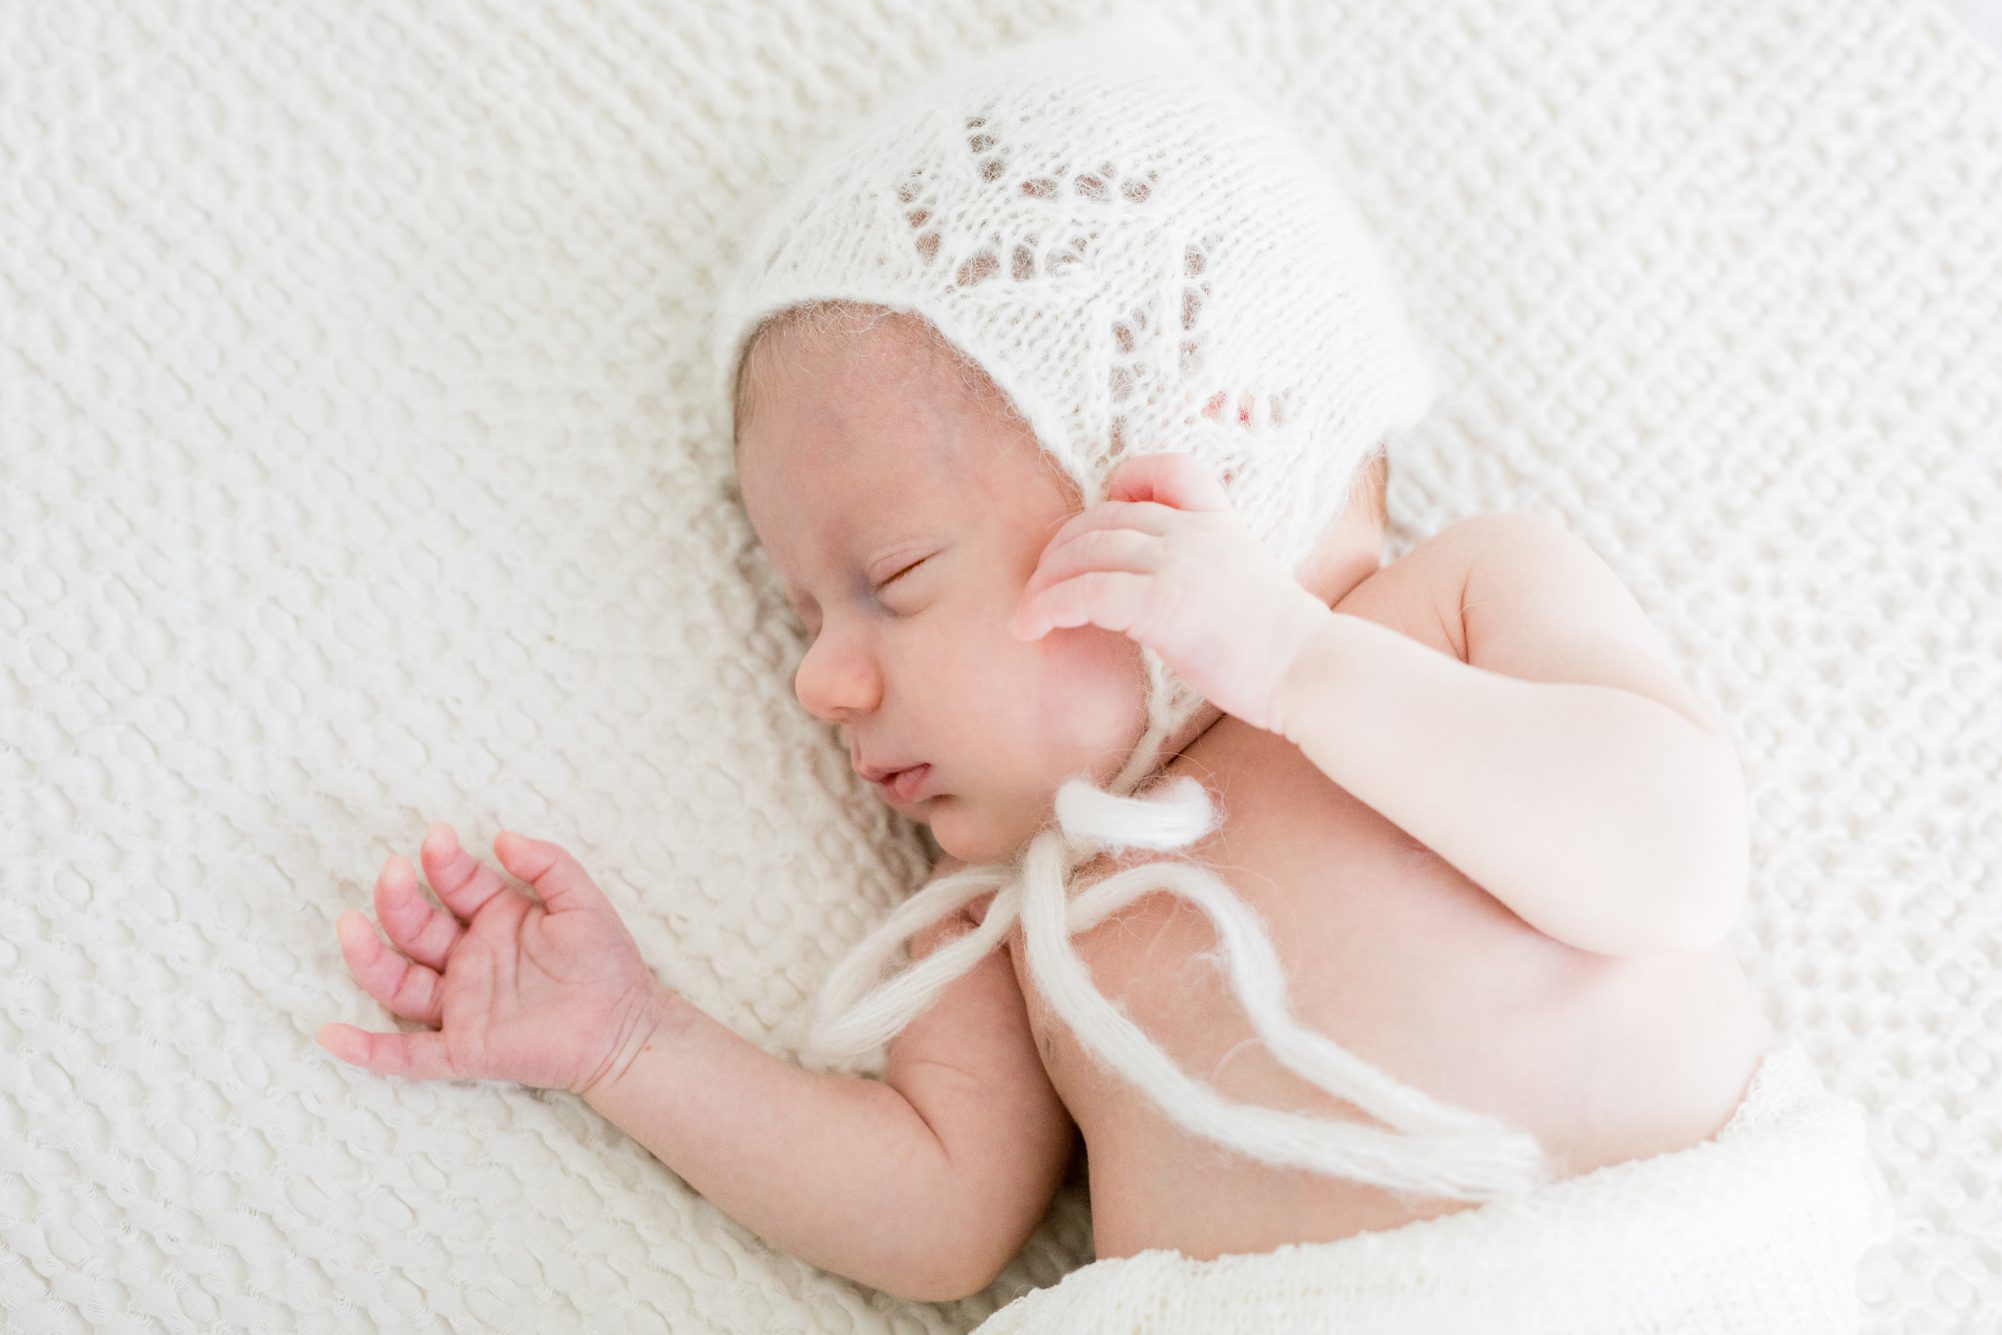 Baby in white bonnet and swaddle during newborn session. Photo by LRG Portraits